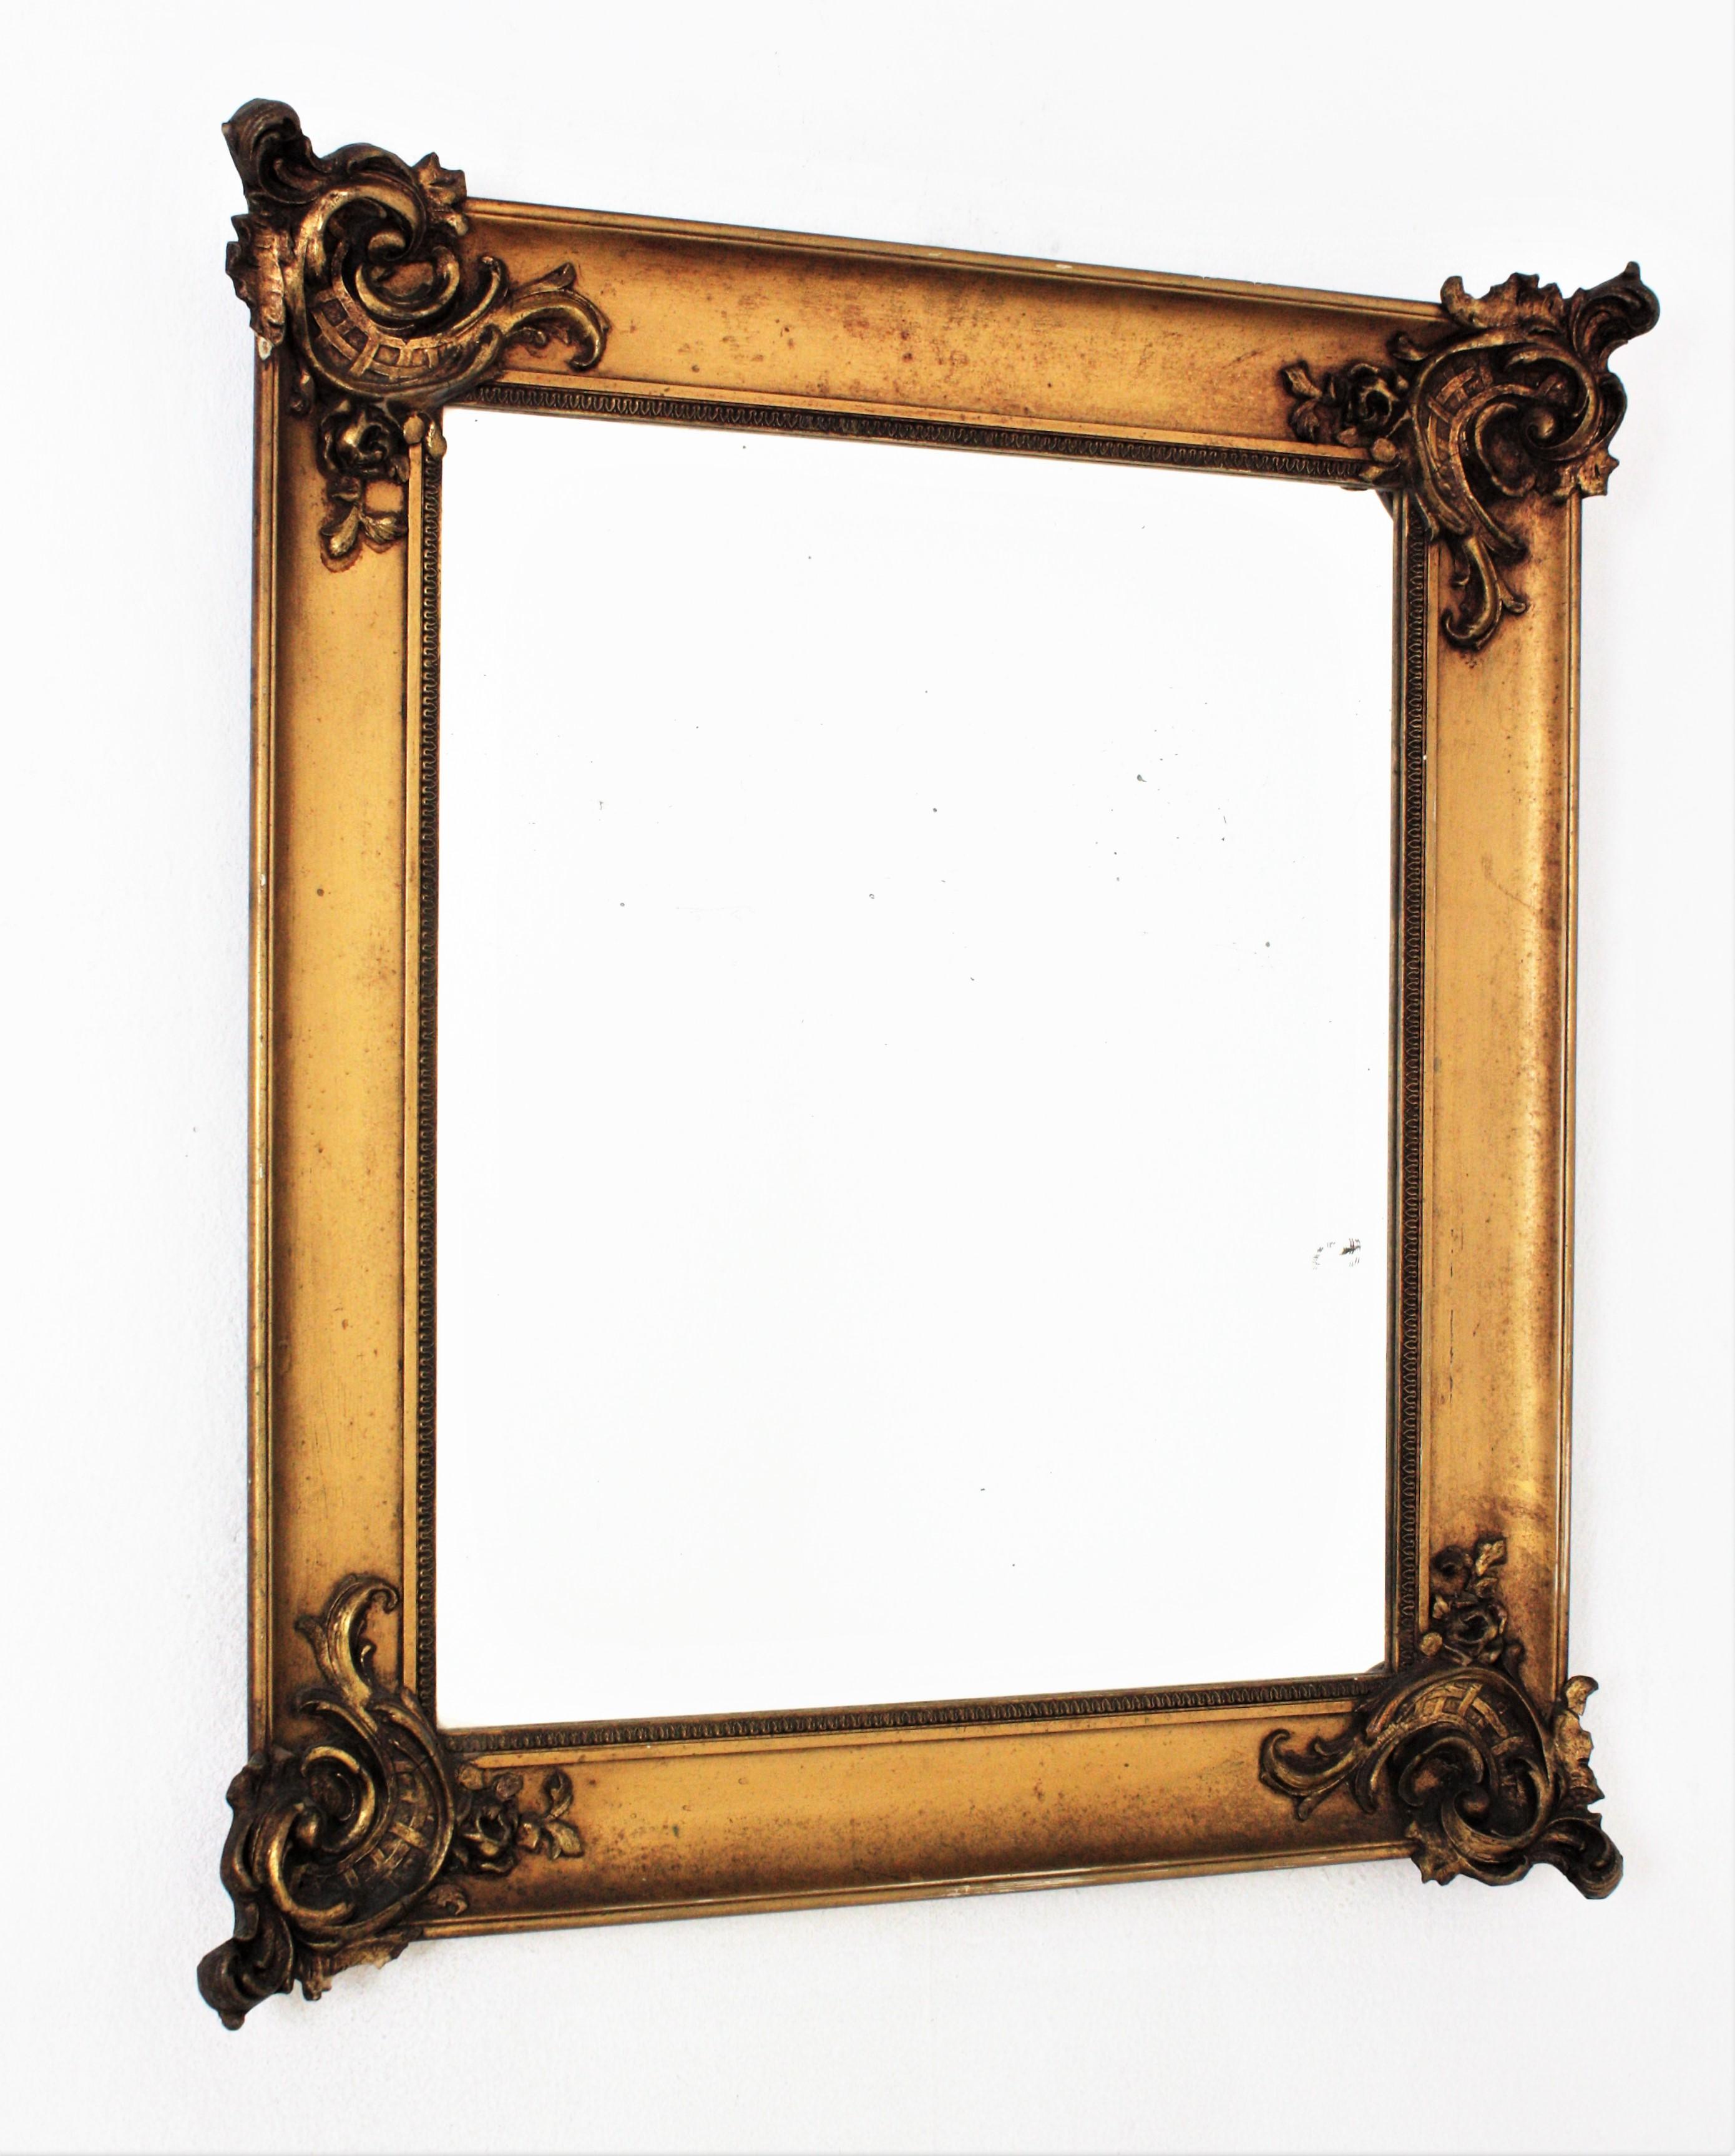 Louis XV style Rectangular mirror, France, 1930s-1940s.
Beautiful gilt wall mirror with foliage decorations at the corners, the style of Louis XV
Measures: 80 cm H x 69 cm W x 9 cm D
Glass measures: 57,5 cm H x 47,5 cm W

We are specialists in